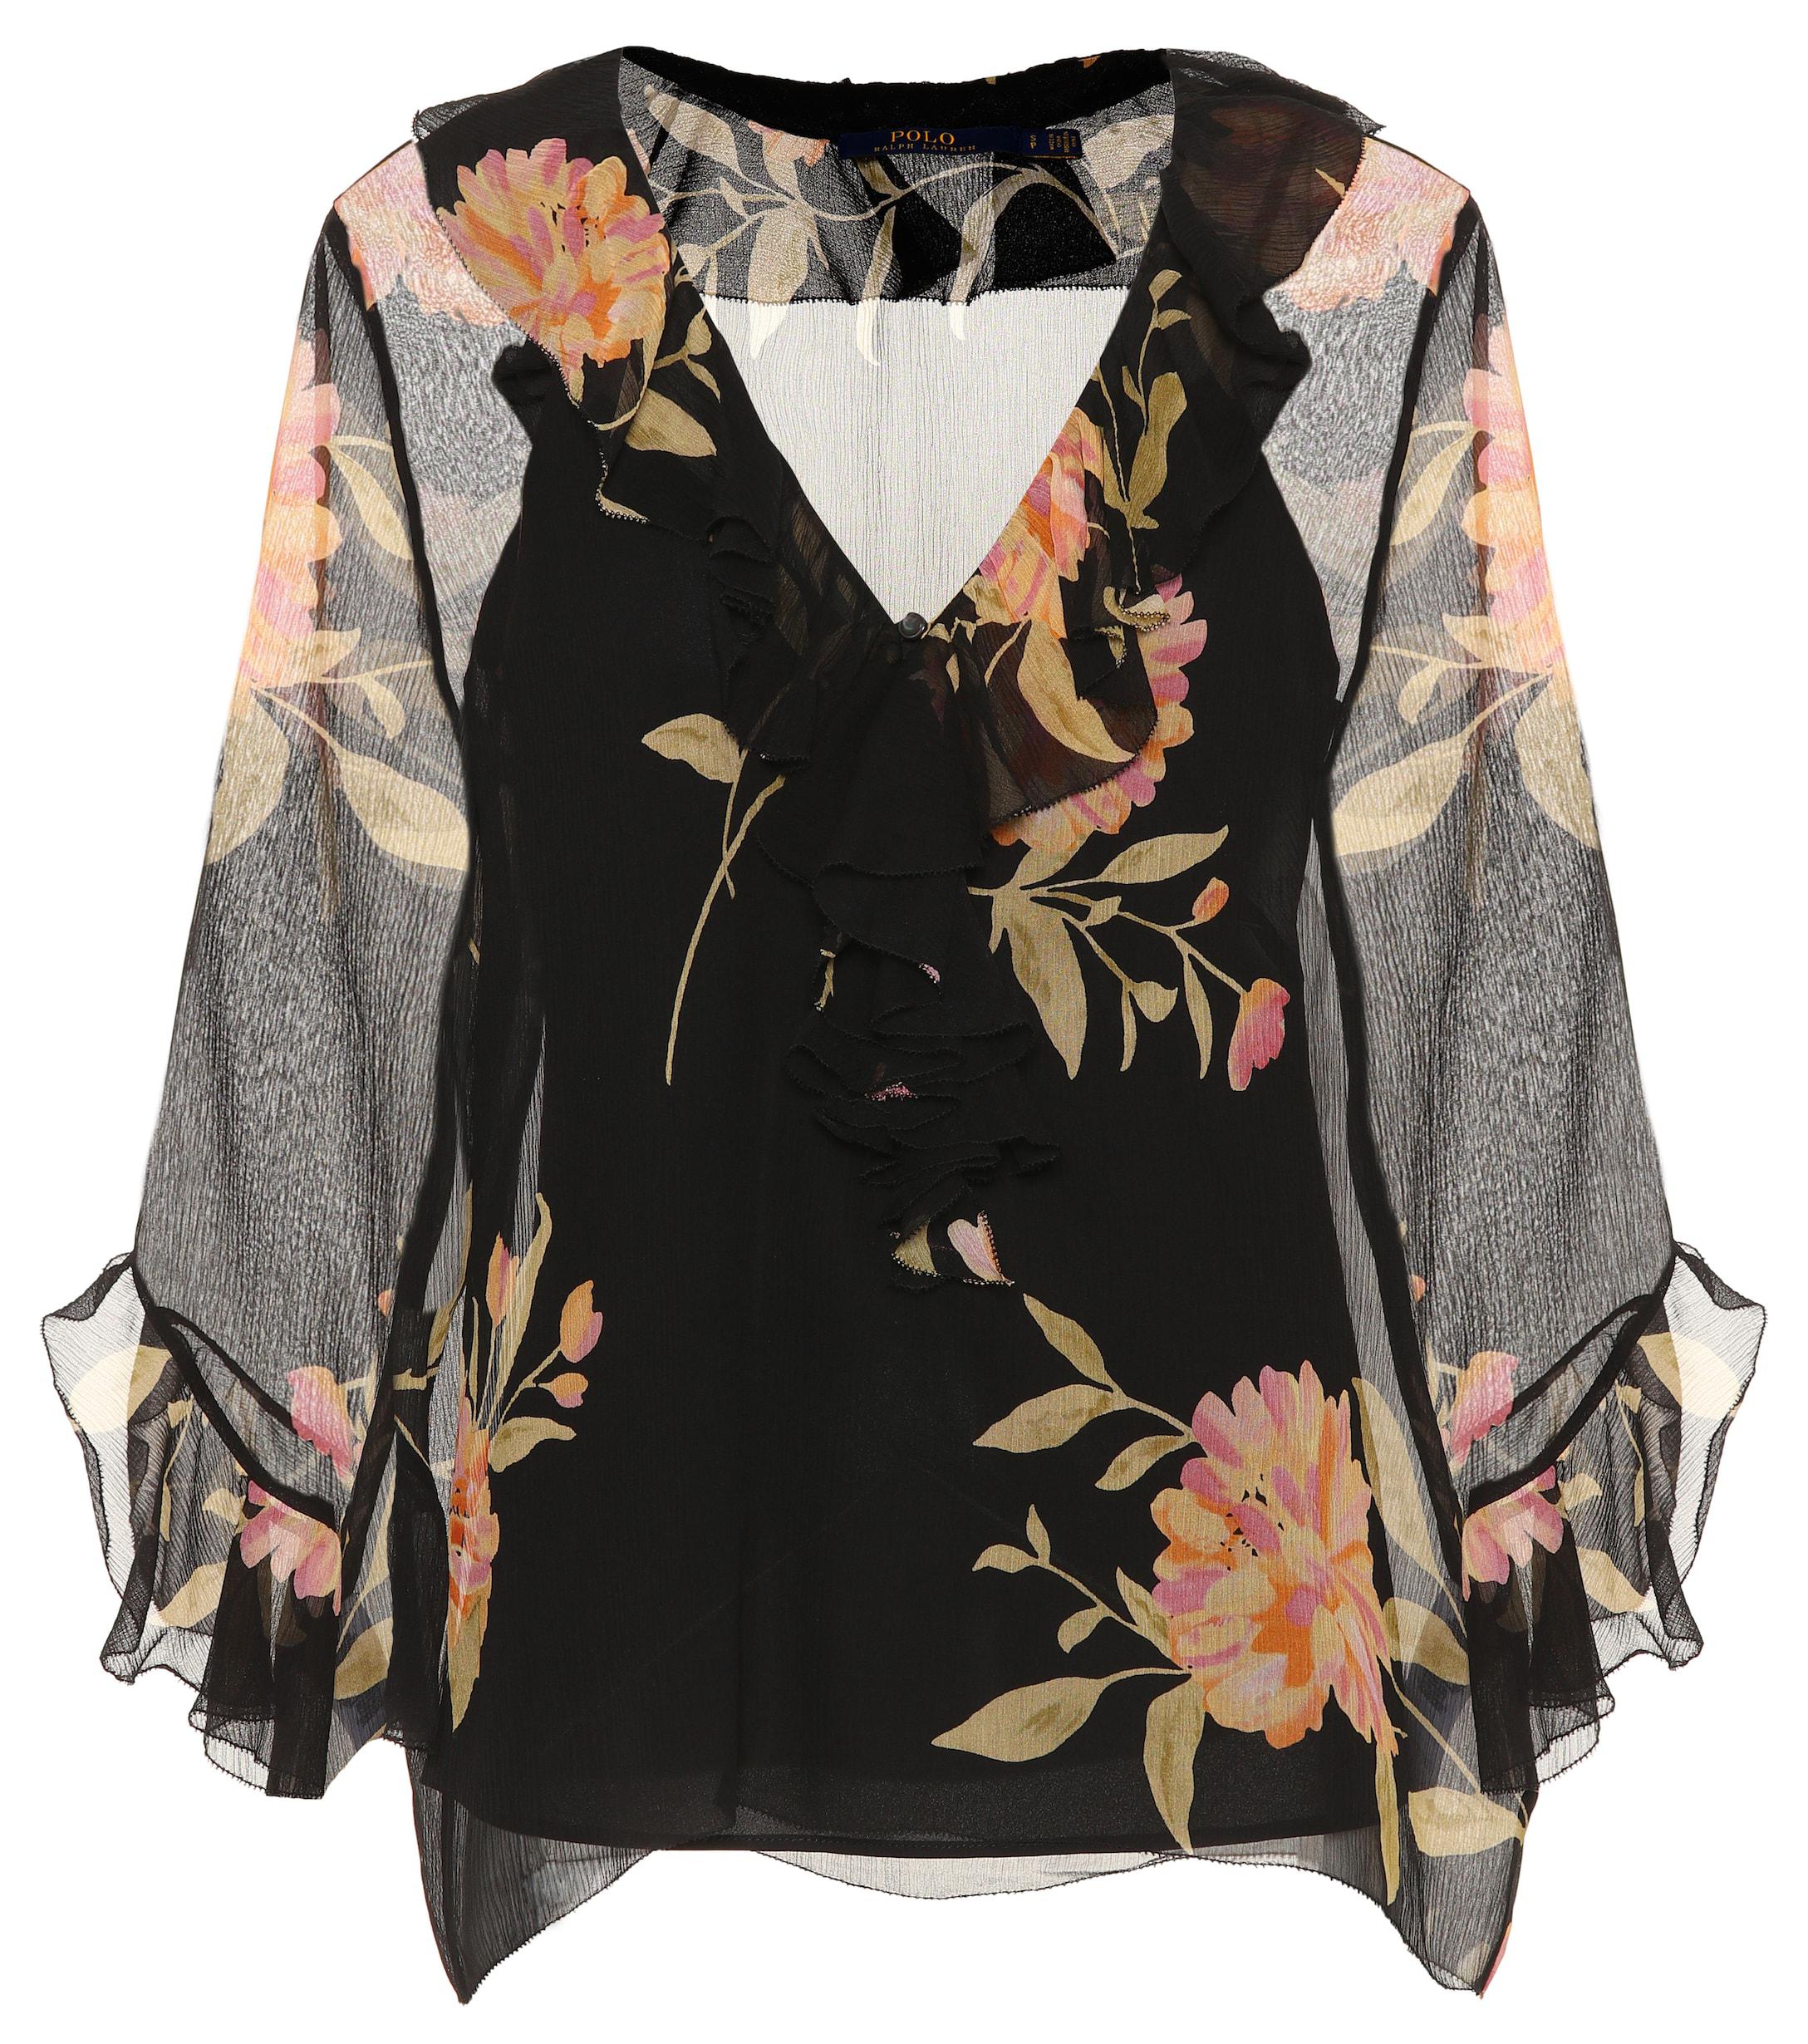 Lyst - Polo Ralph Lauren Ruffled Floral-printed Silk Blouse in Black